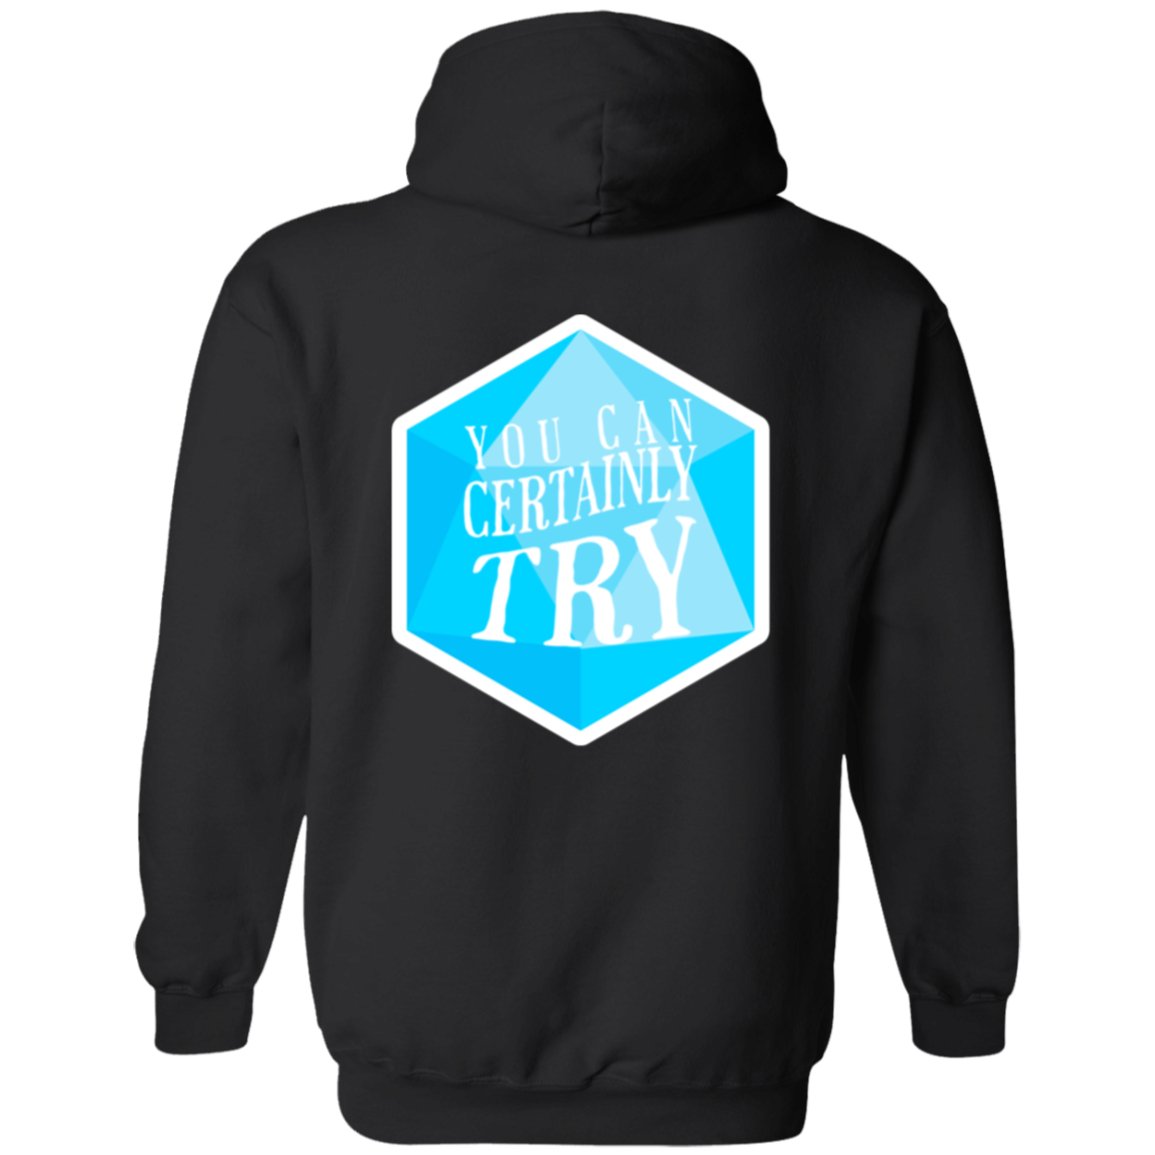 You Can Certainly Try Zip Up Hooded Sweatshirt